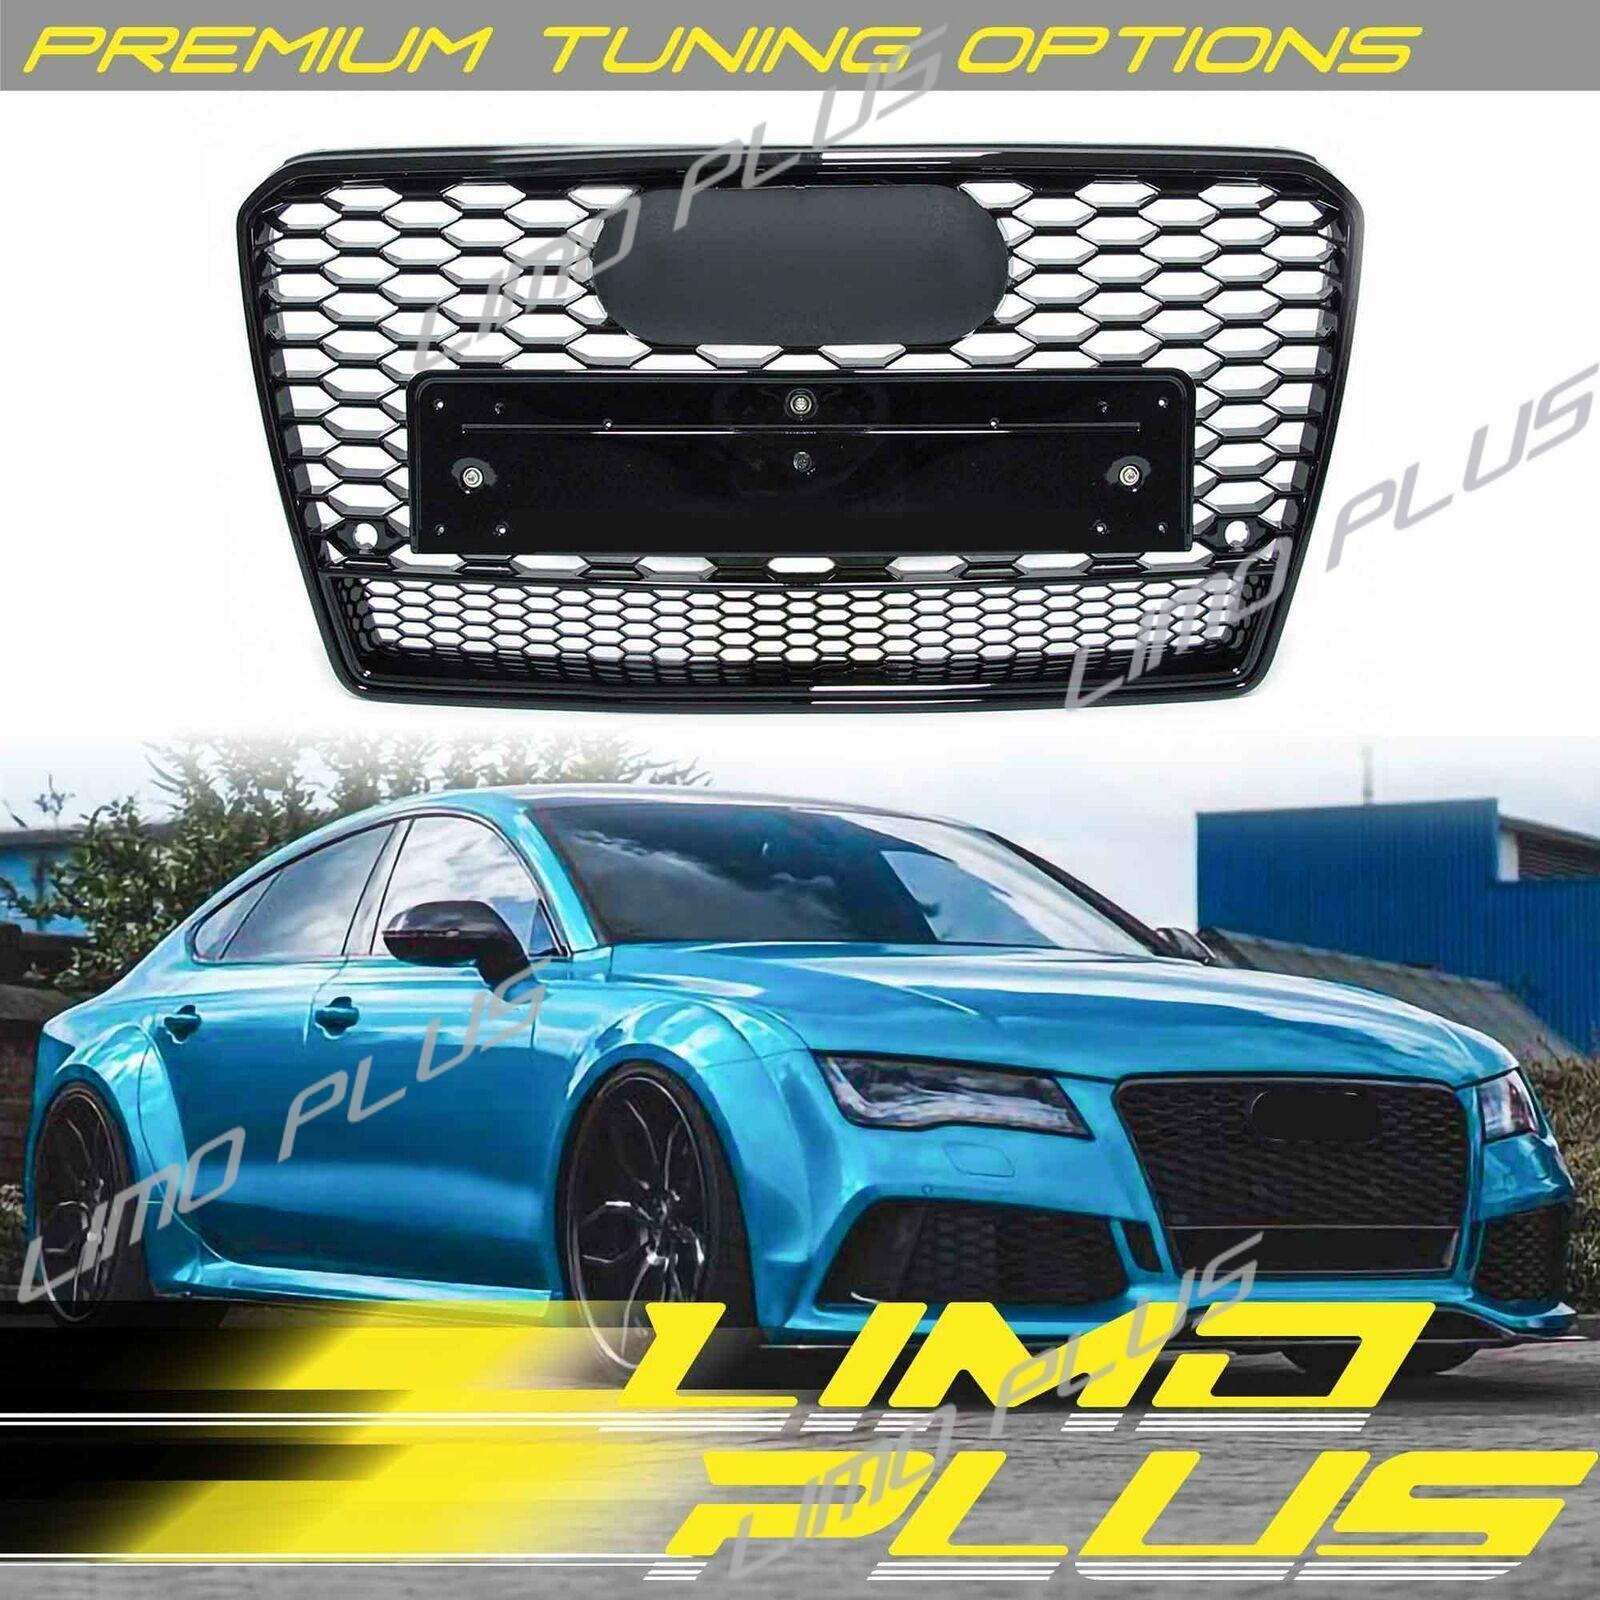 RS7 Style Front Honeycomb Black Grille for Audi A7 S7 2012 2013 2014 2015